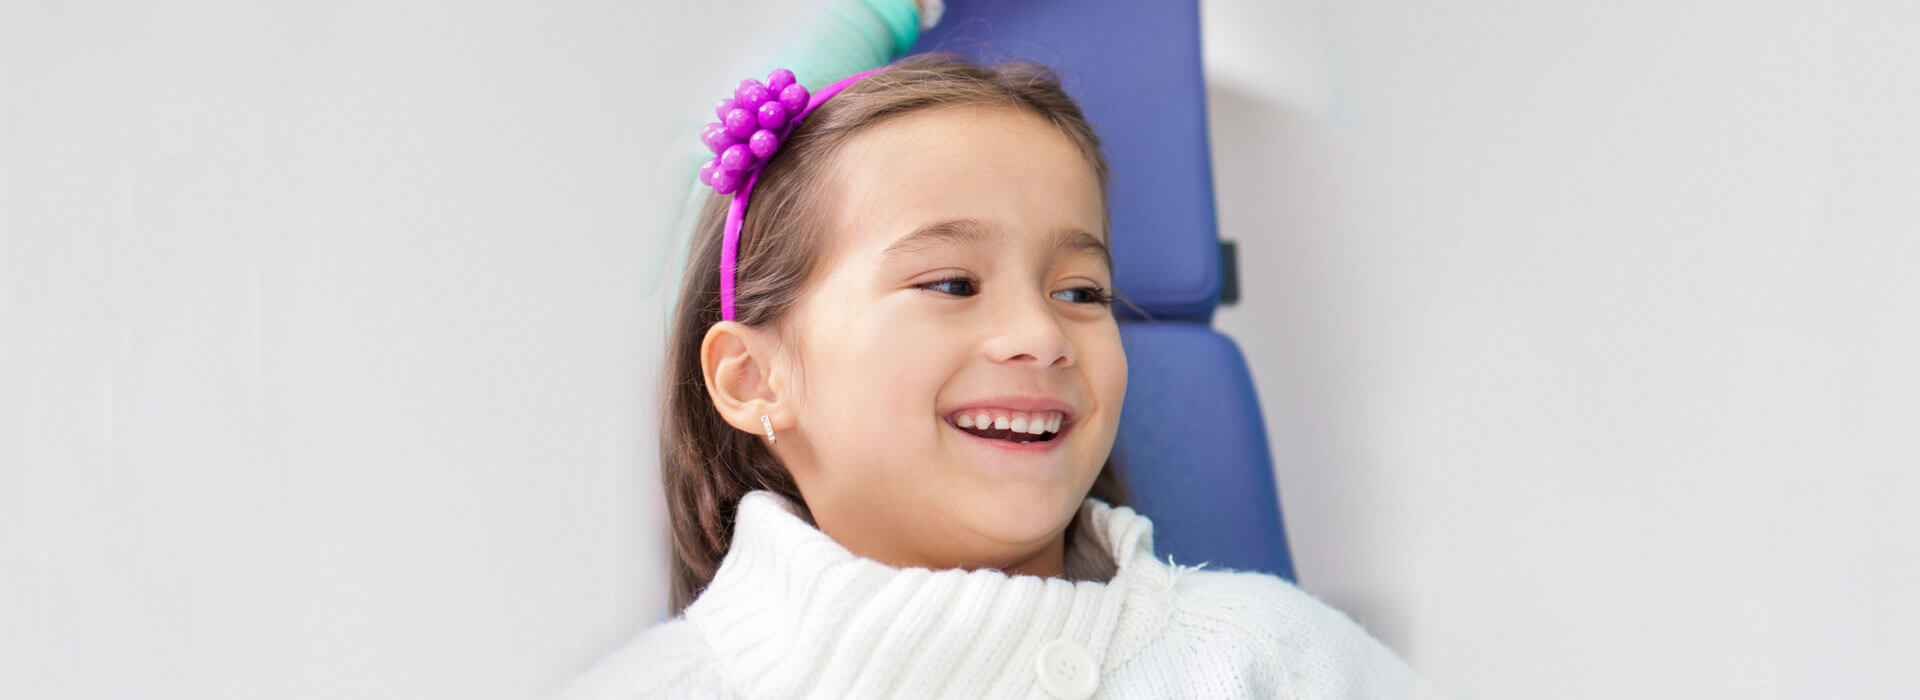 Benefits Of Dental Sealants For Your Child